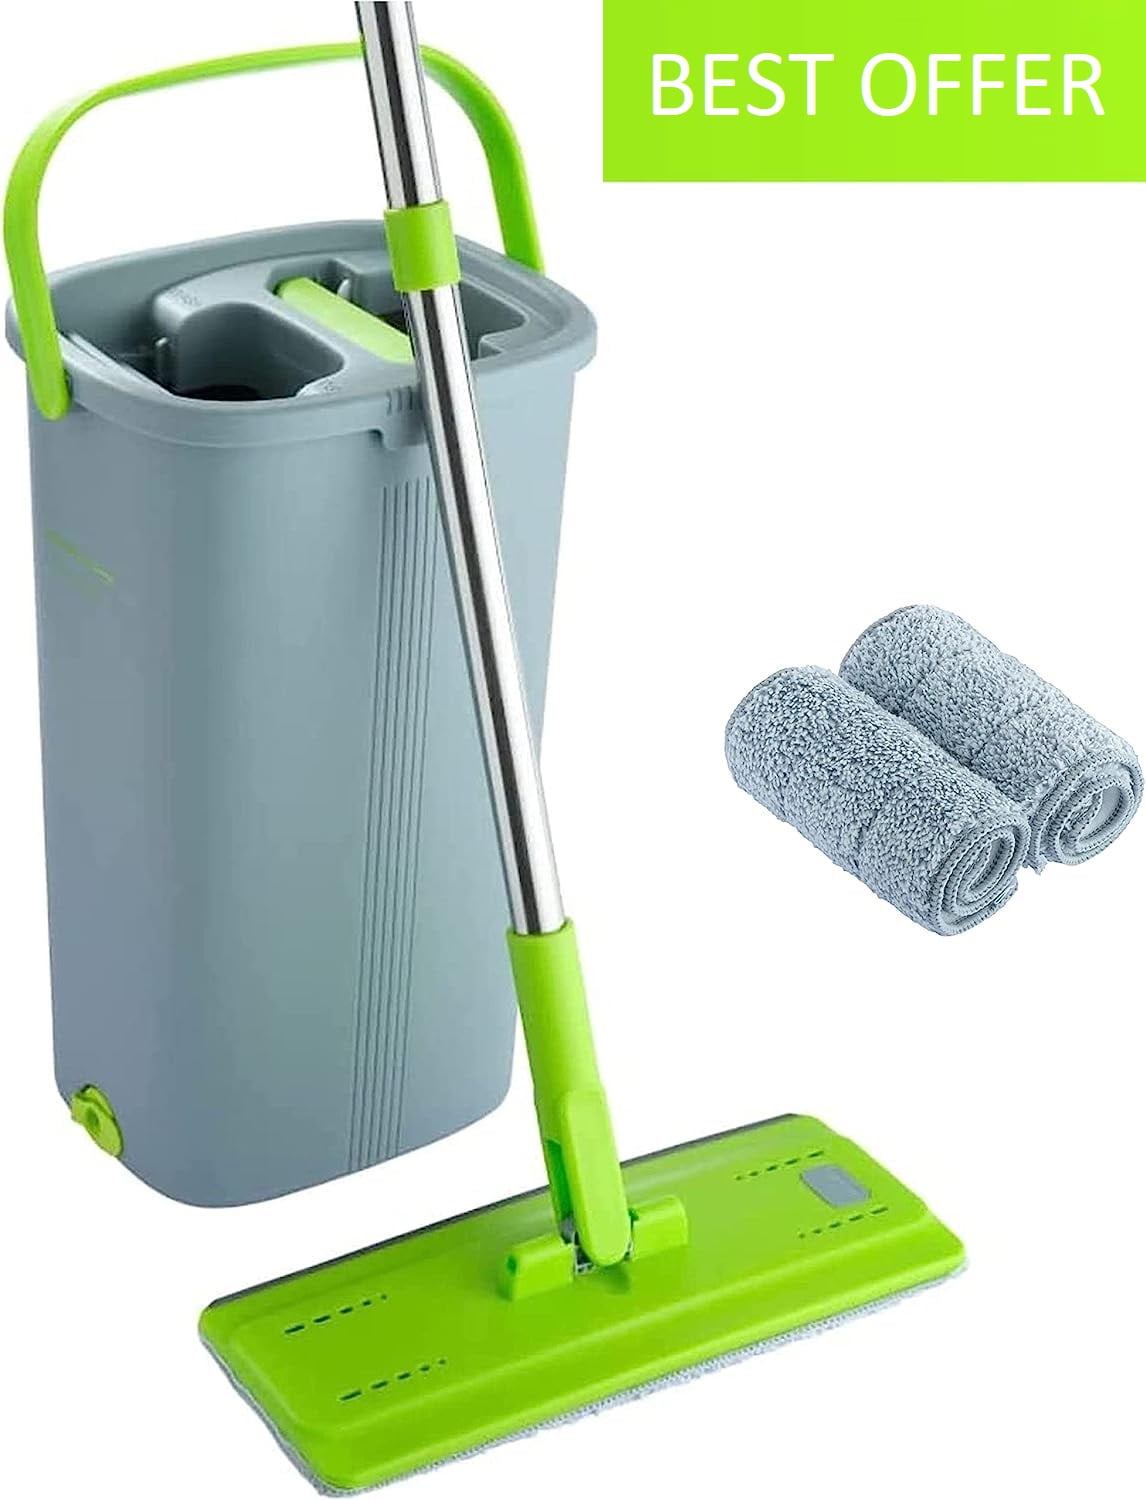 agenda Bakken sturen Easy Gleam Mop and Bucket Set. Microfiber Flat Mop with Stainless Steel  Handle, Innovative Twin Chamber Bucket for Wet & Dry use. 3 Reusable Pads  Supplied, Suitable for All Floor Types -